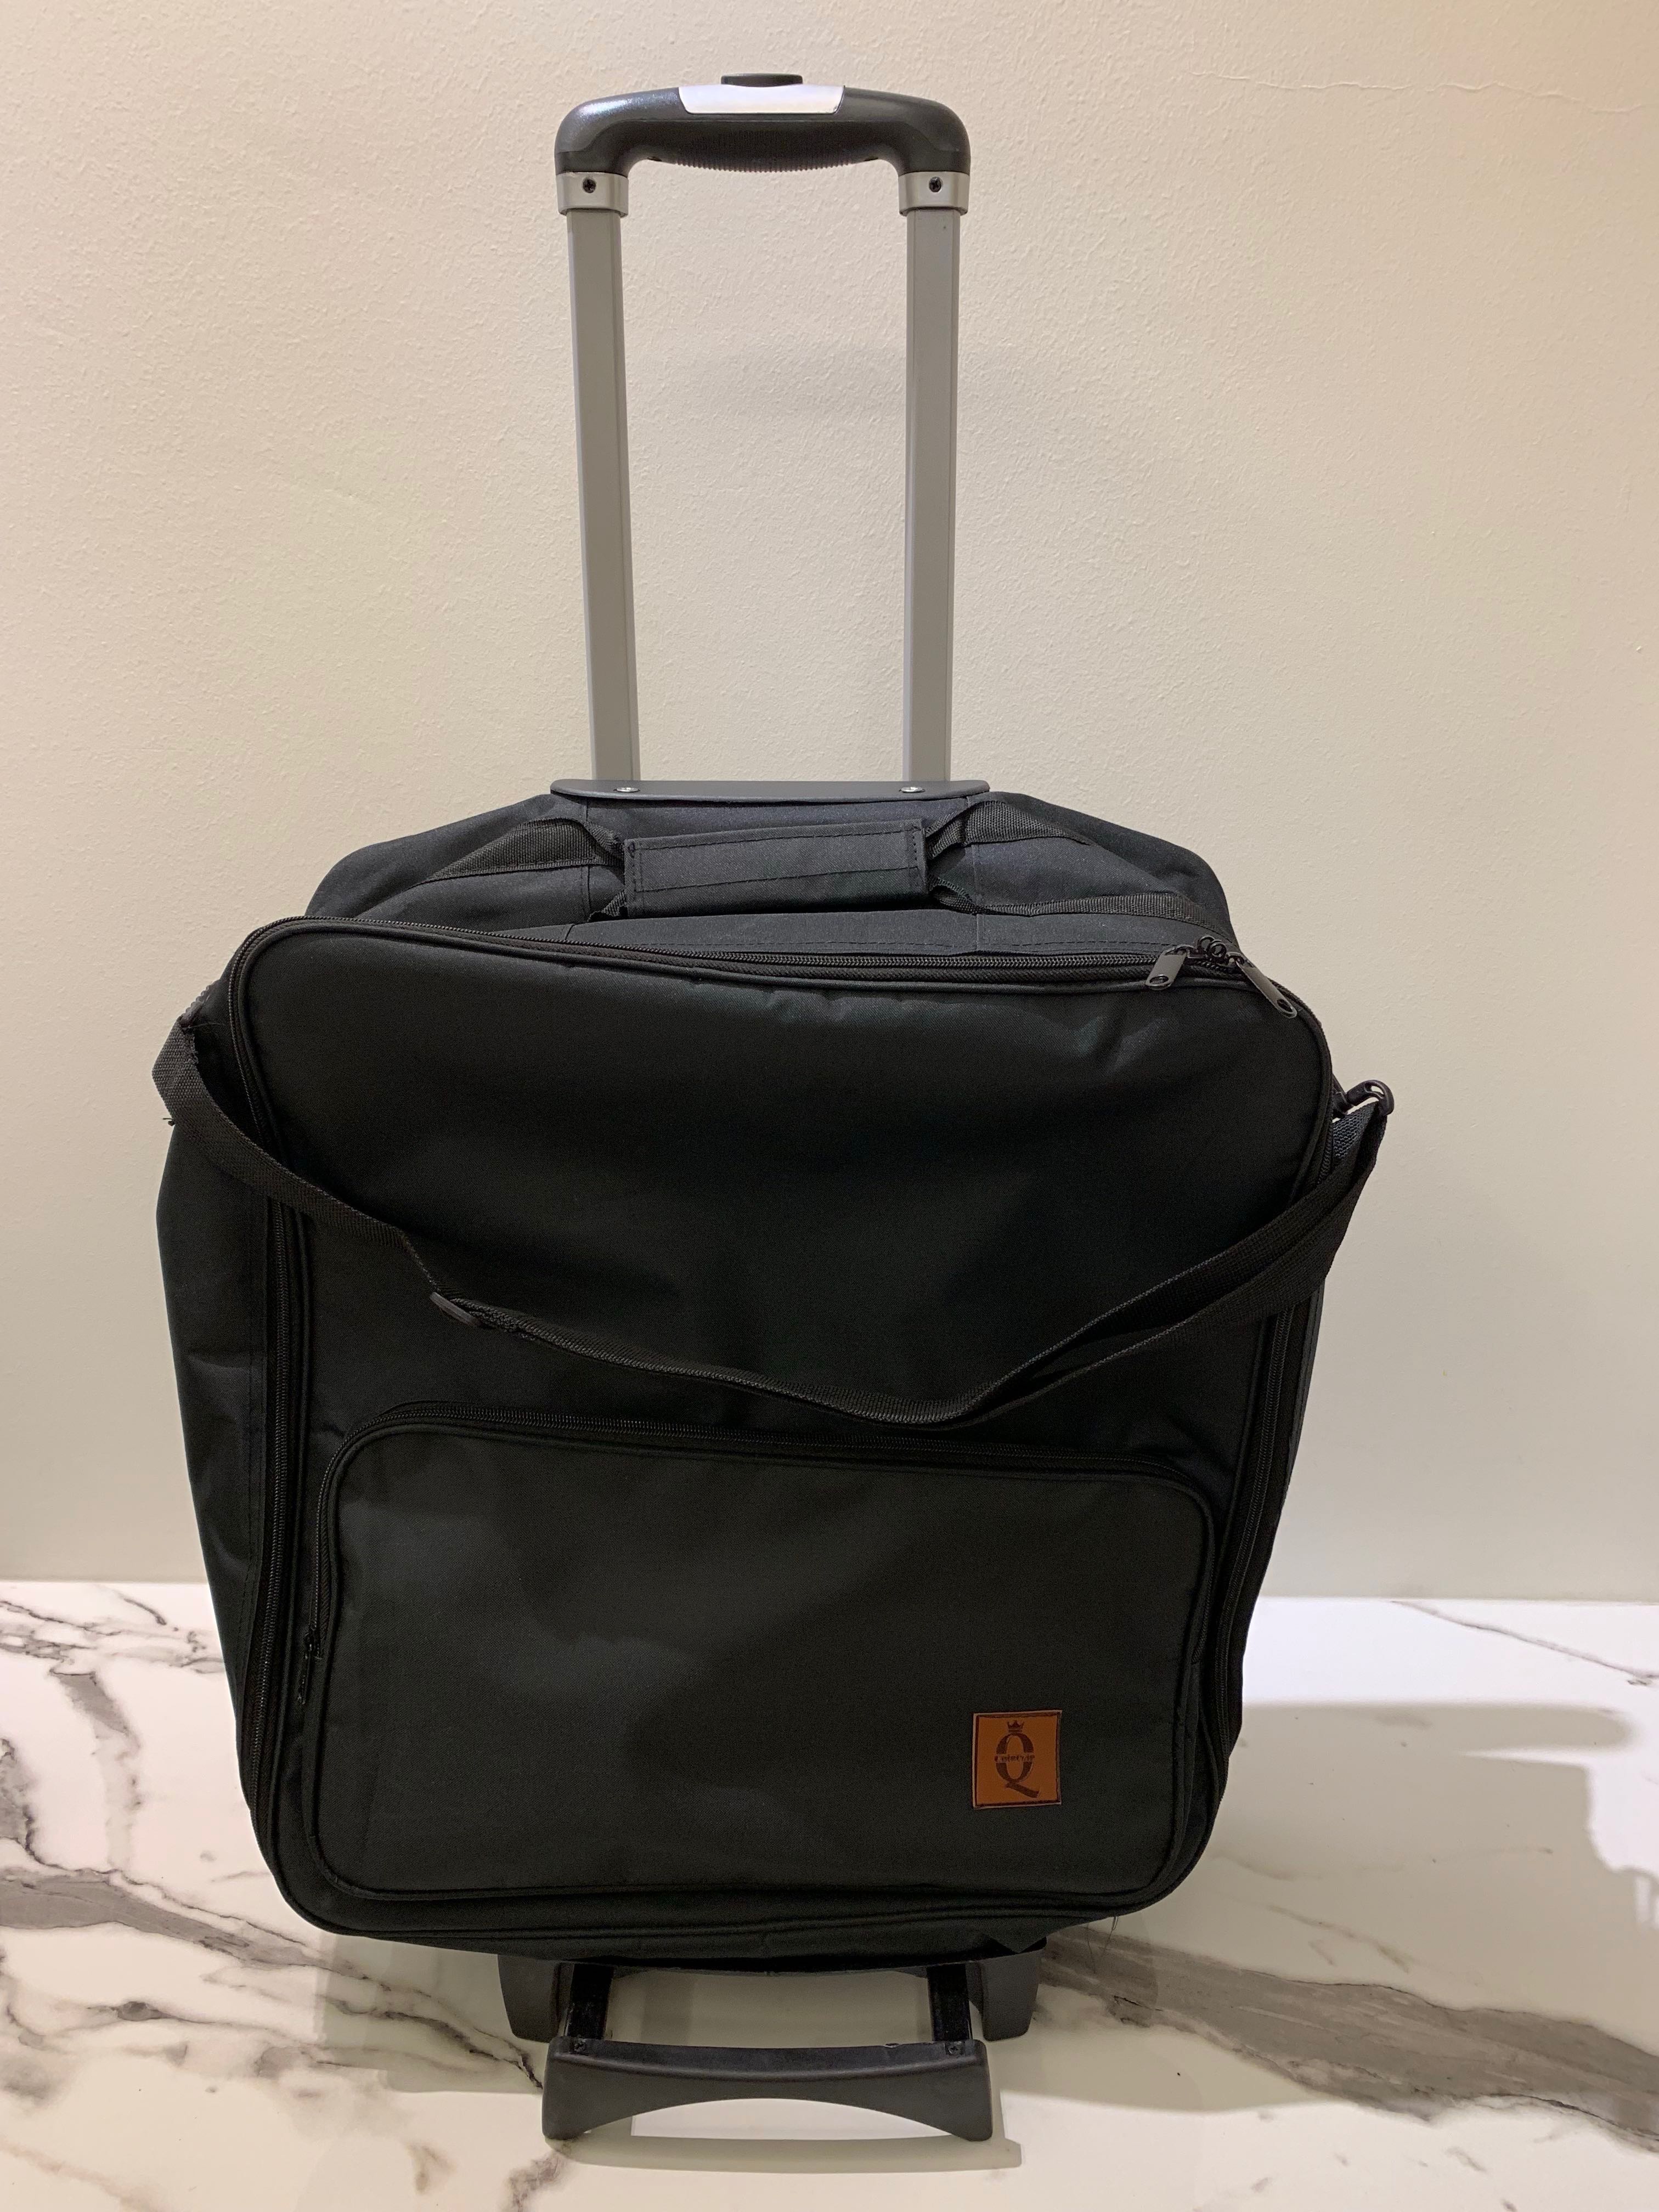 stroller travel bag with wheels